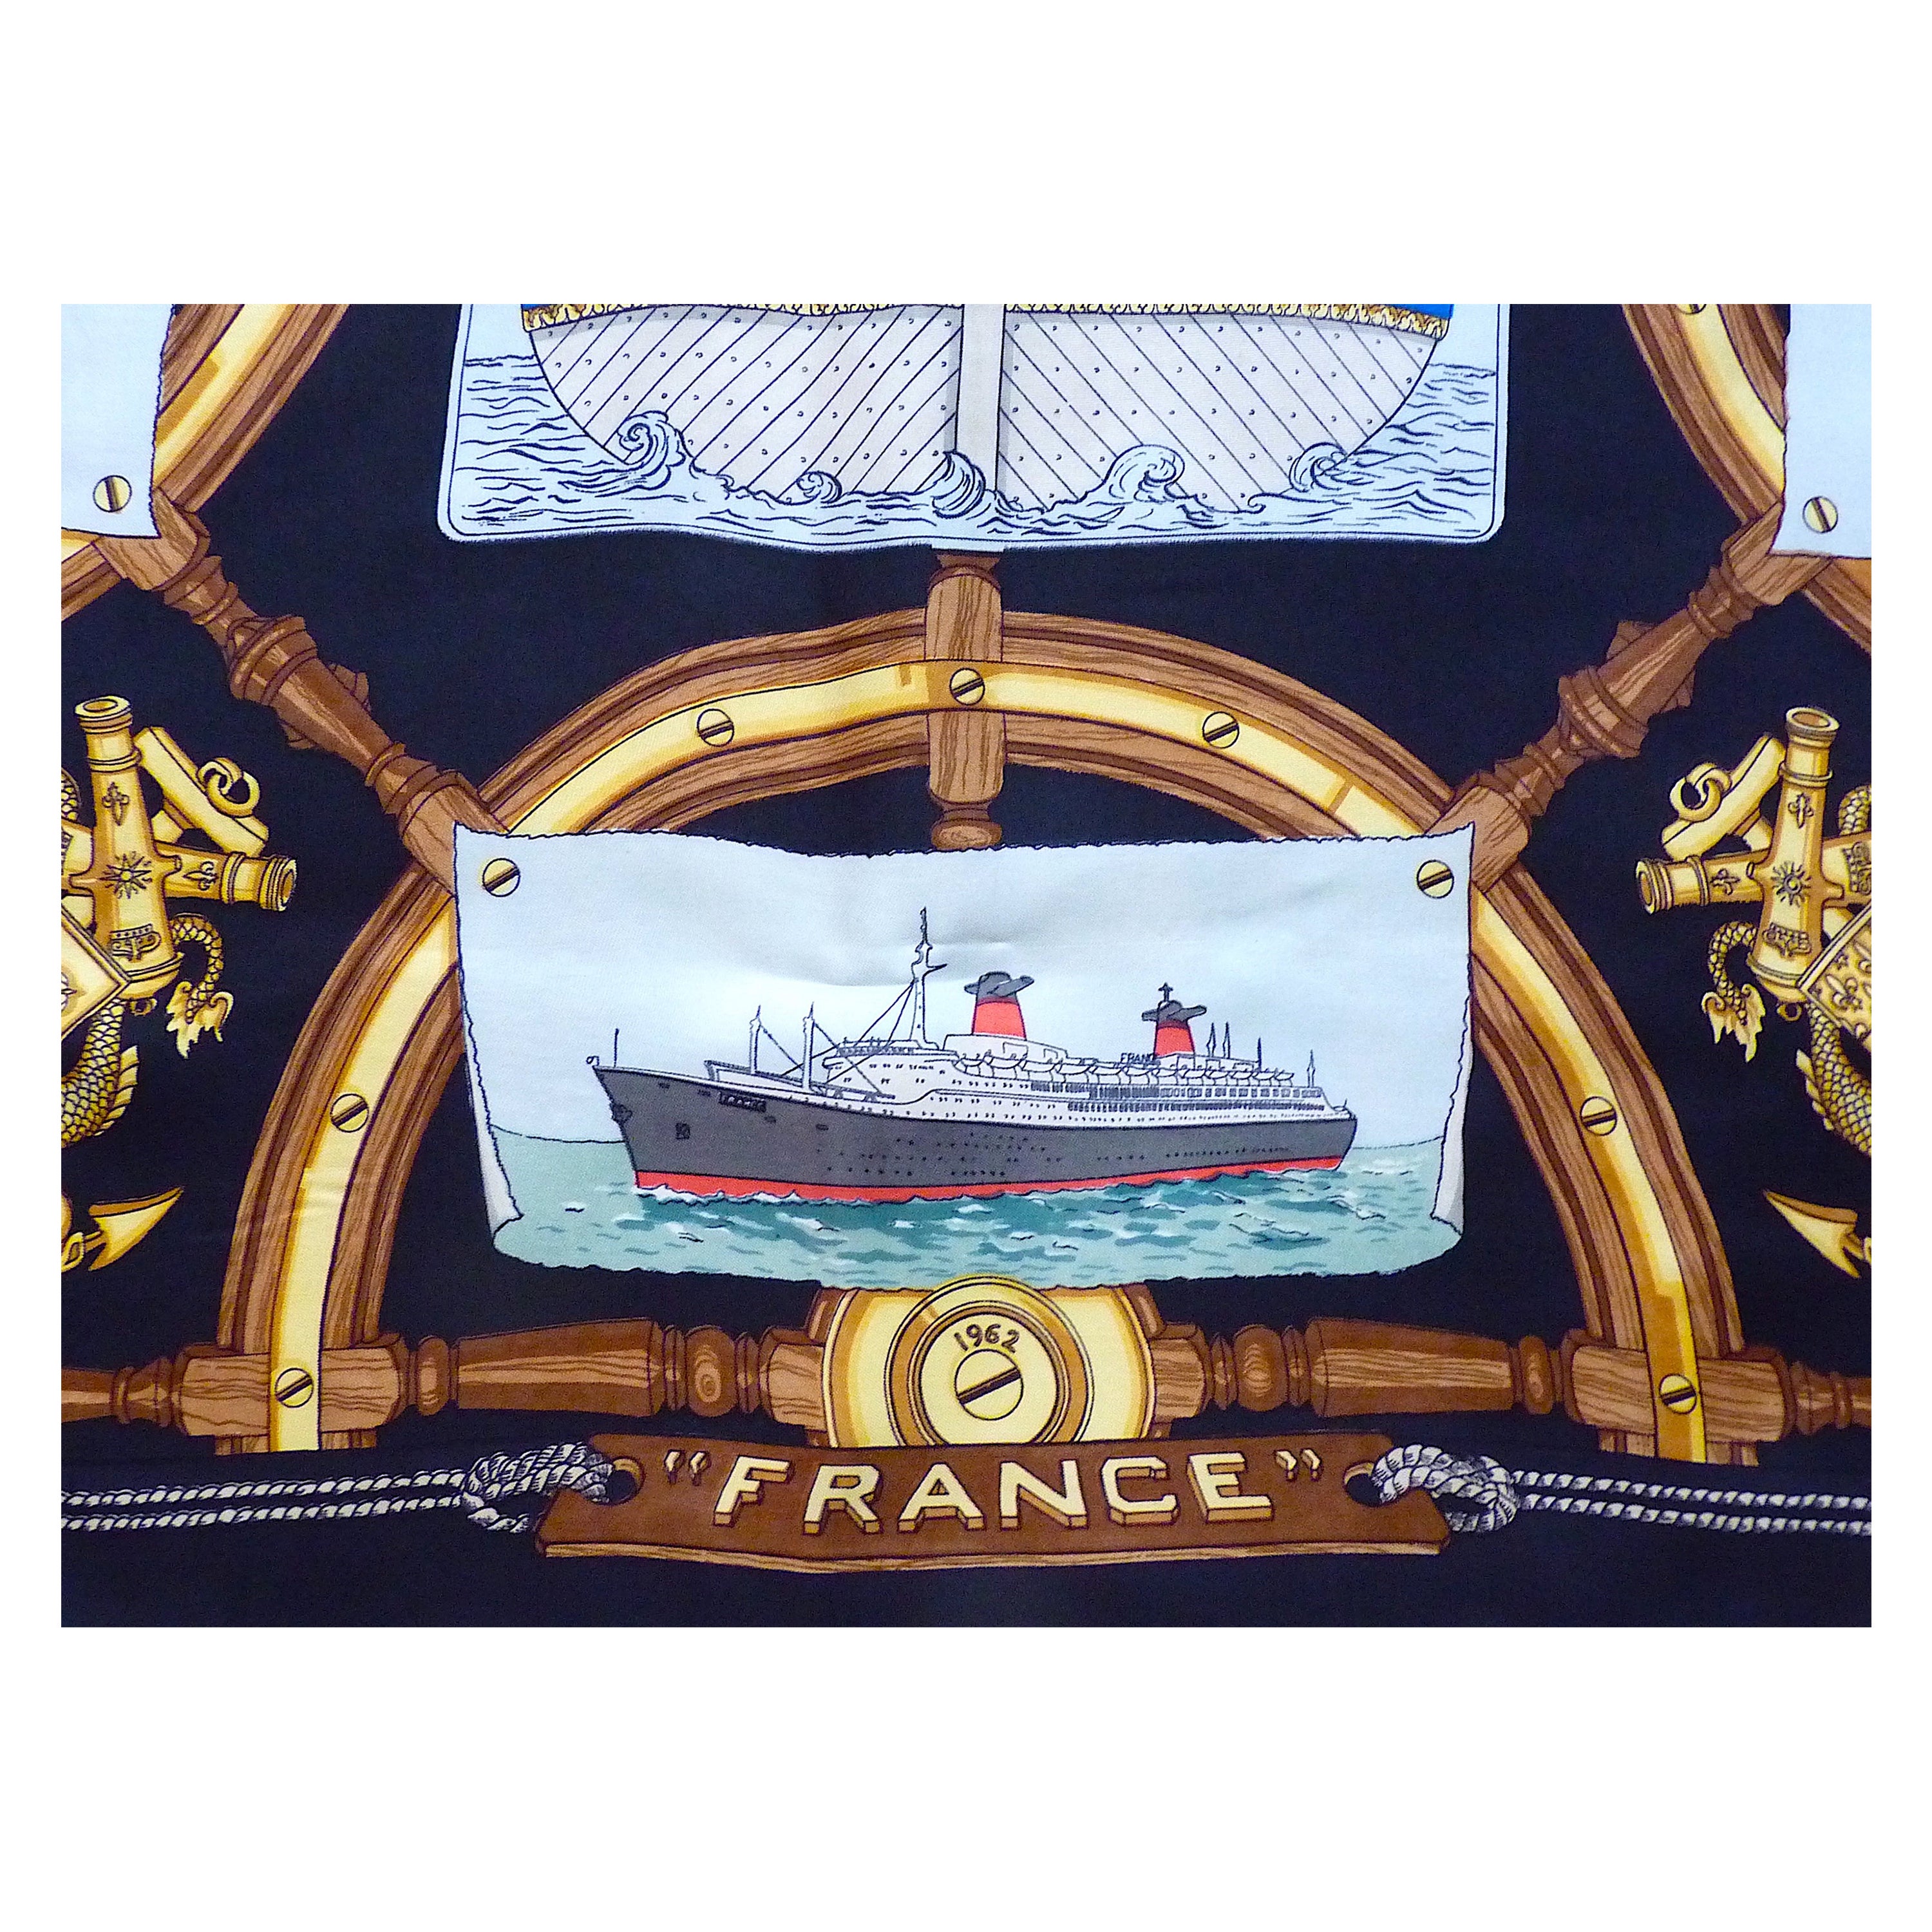 Vintage Hermes Scarf Special Edition "France" from 1962